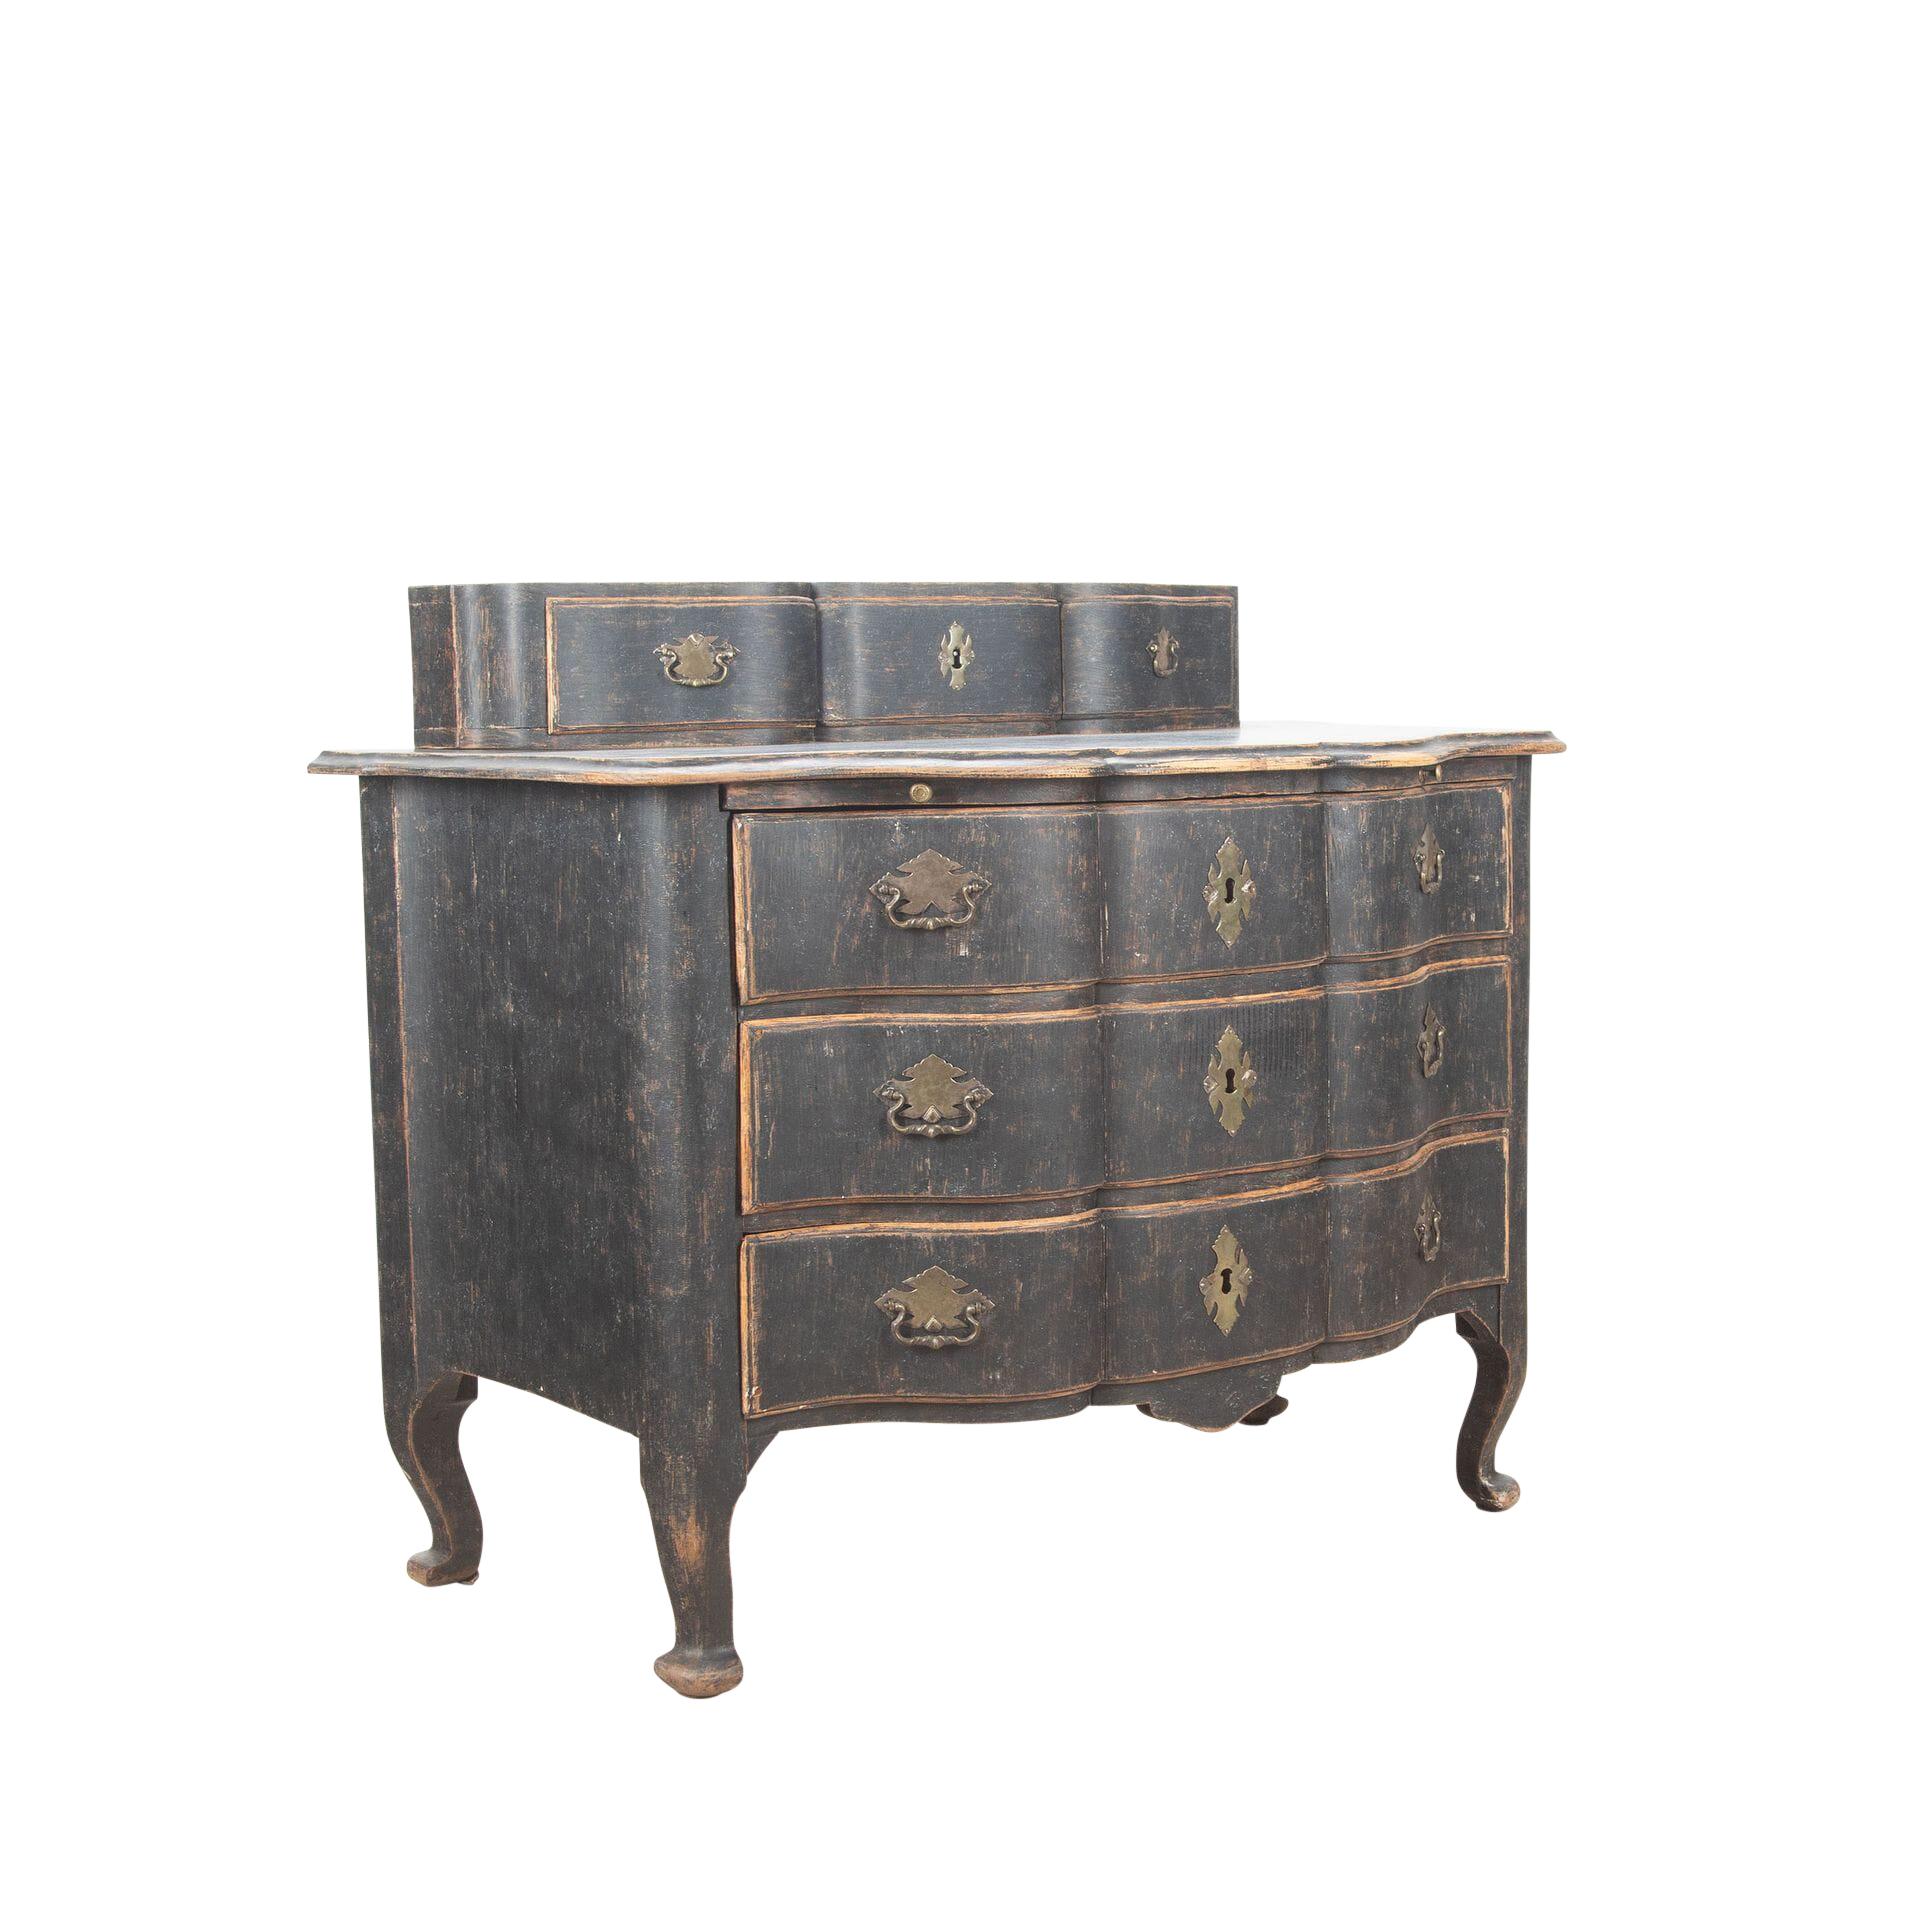 A large period Rococo commode made in Stockholm.
The top three drawers are original but optional and could be removed, below are three carved drawers. 
With original hardware in argent hache, later locks and repainted in soft black.
Height 81.5cm